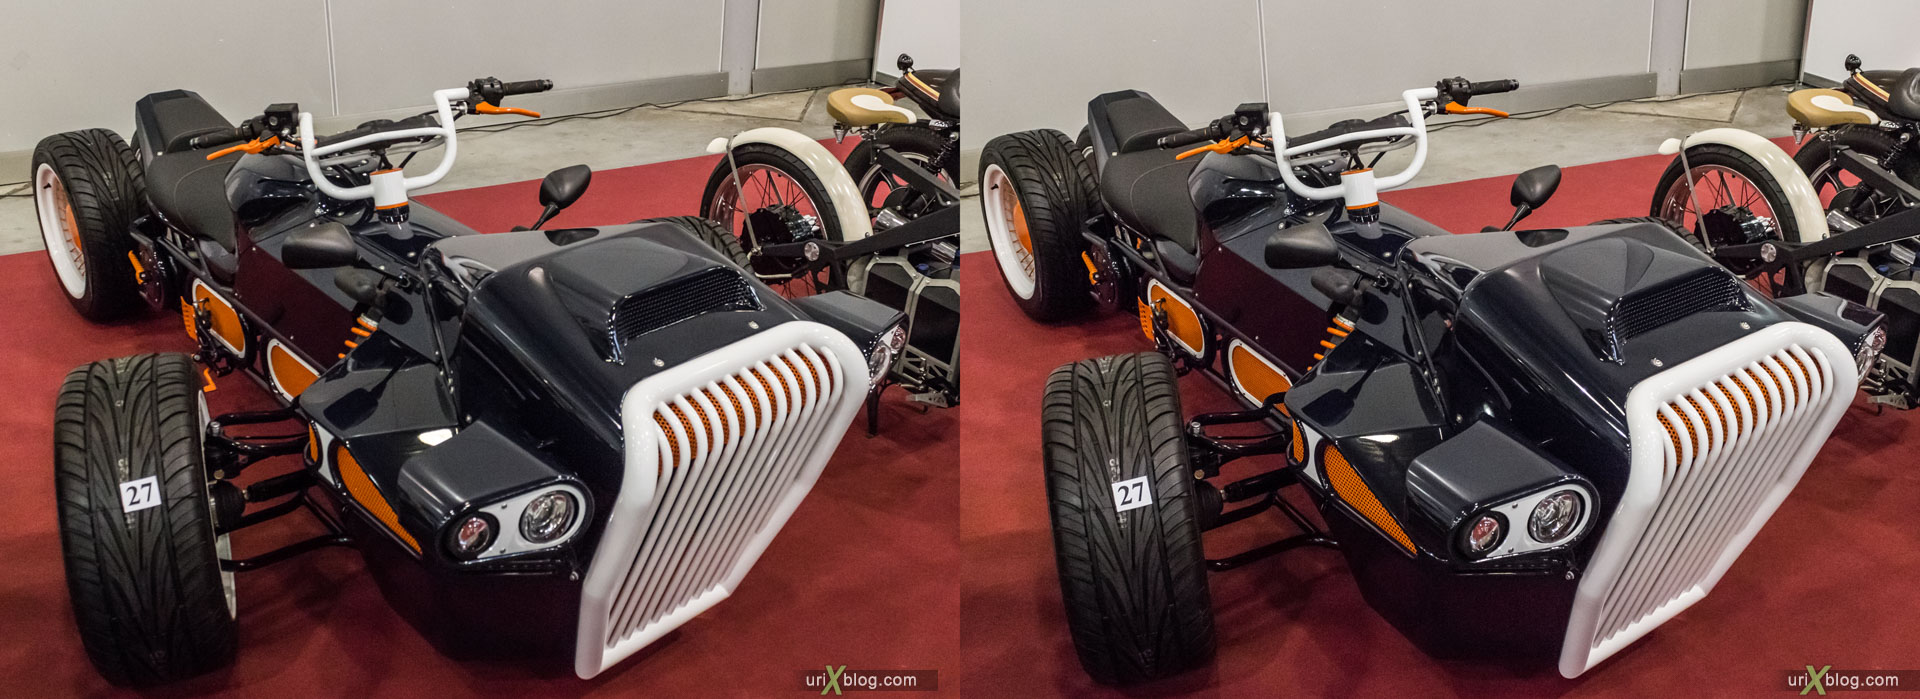 Moto park, exhibition, Crocus Expo, Moscow, Russia, 3D, stereo pair, cross-eyed, crossview, cross view stereo pair, stereoscopic, 2015